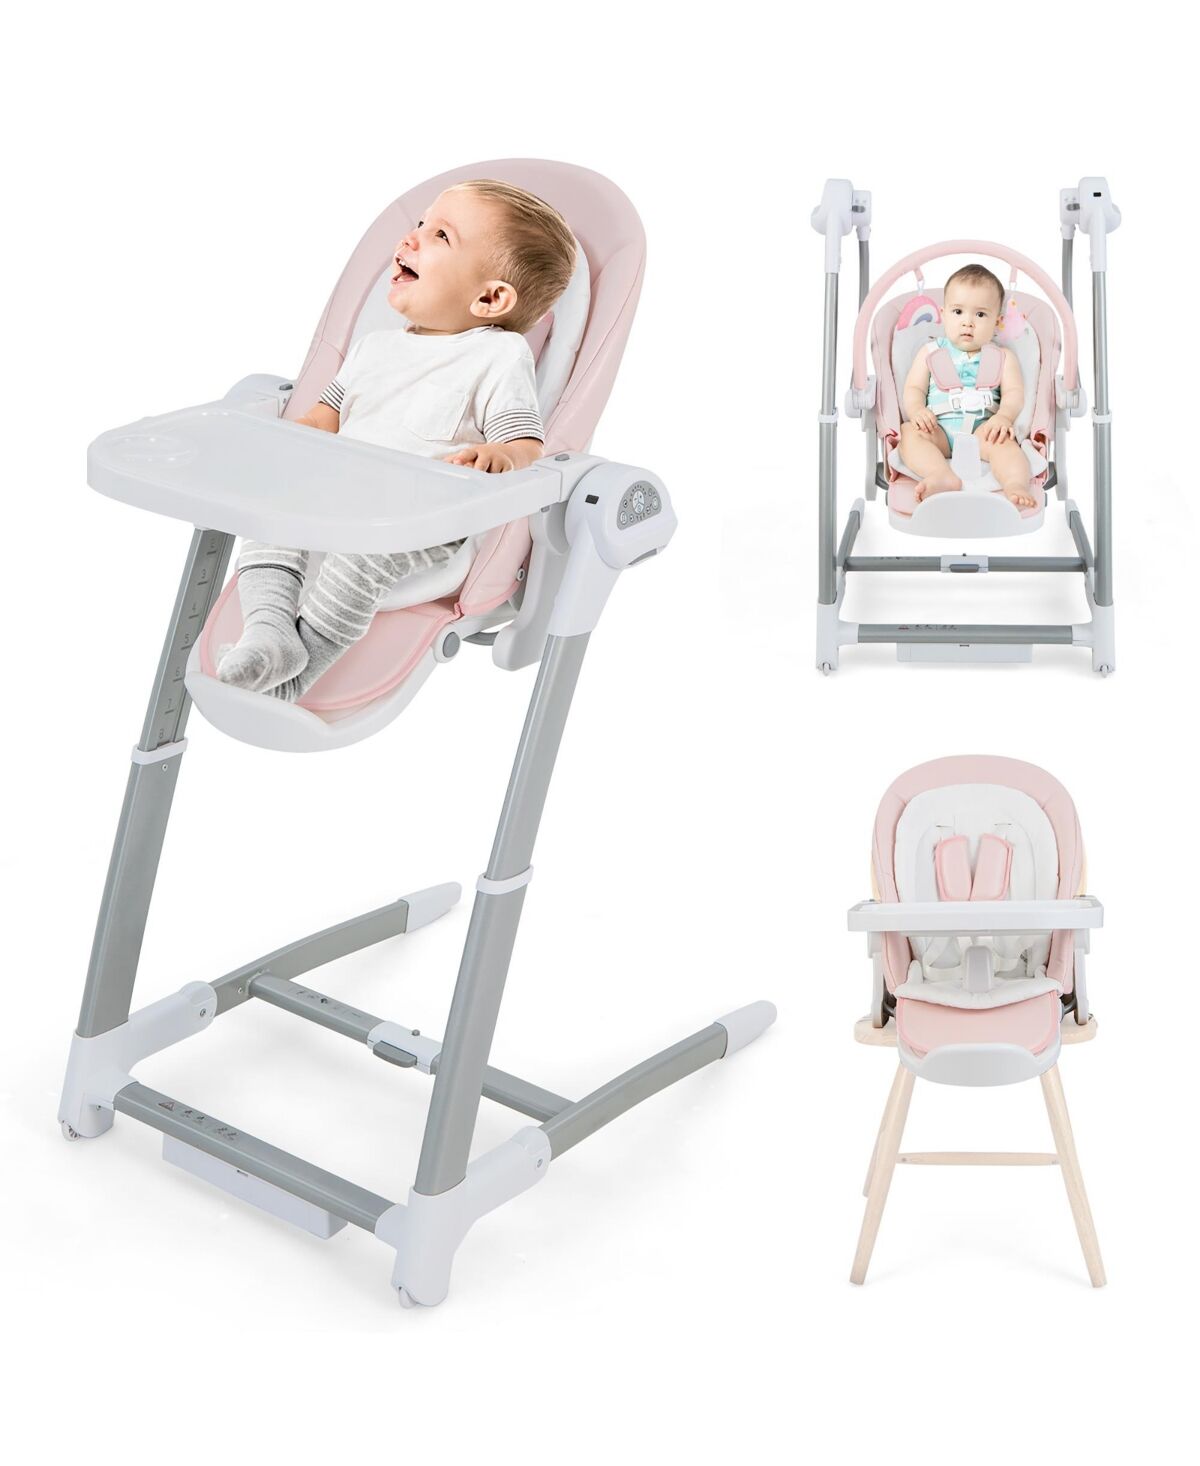 Costway 3-in-1 Baby Swing & High Chair with 8 Adjustable Heights & Music Box - Pink